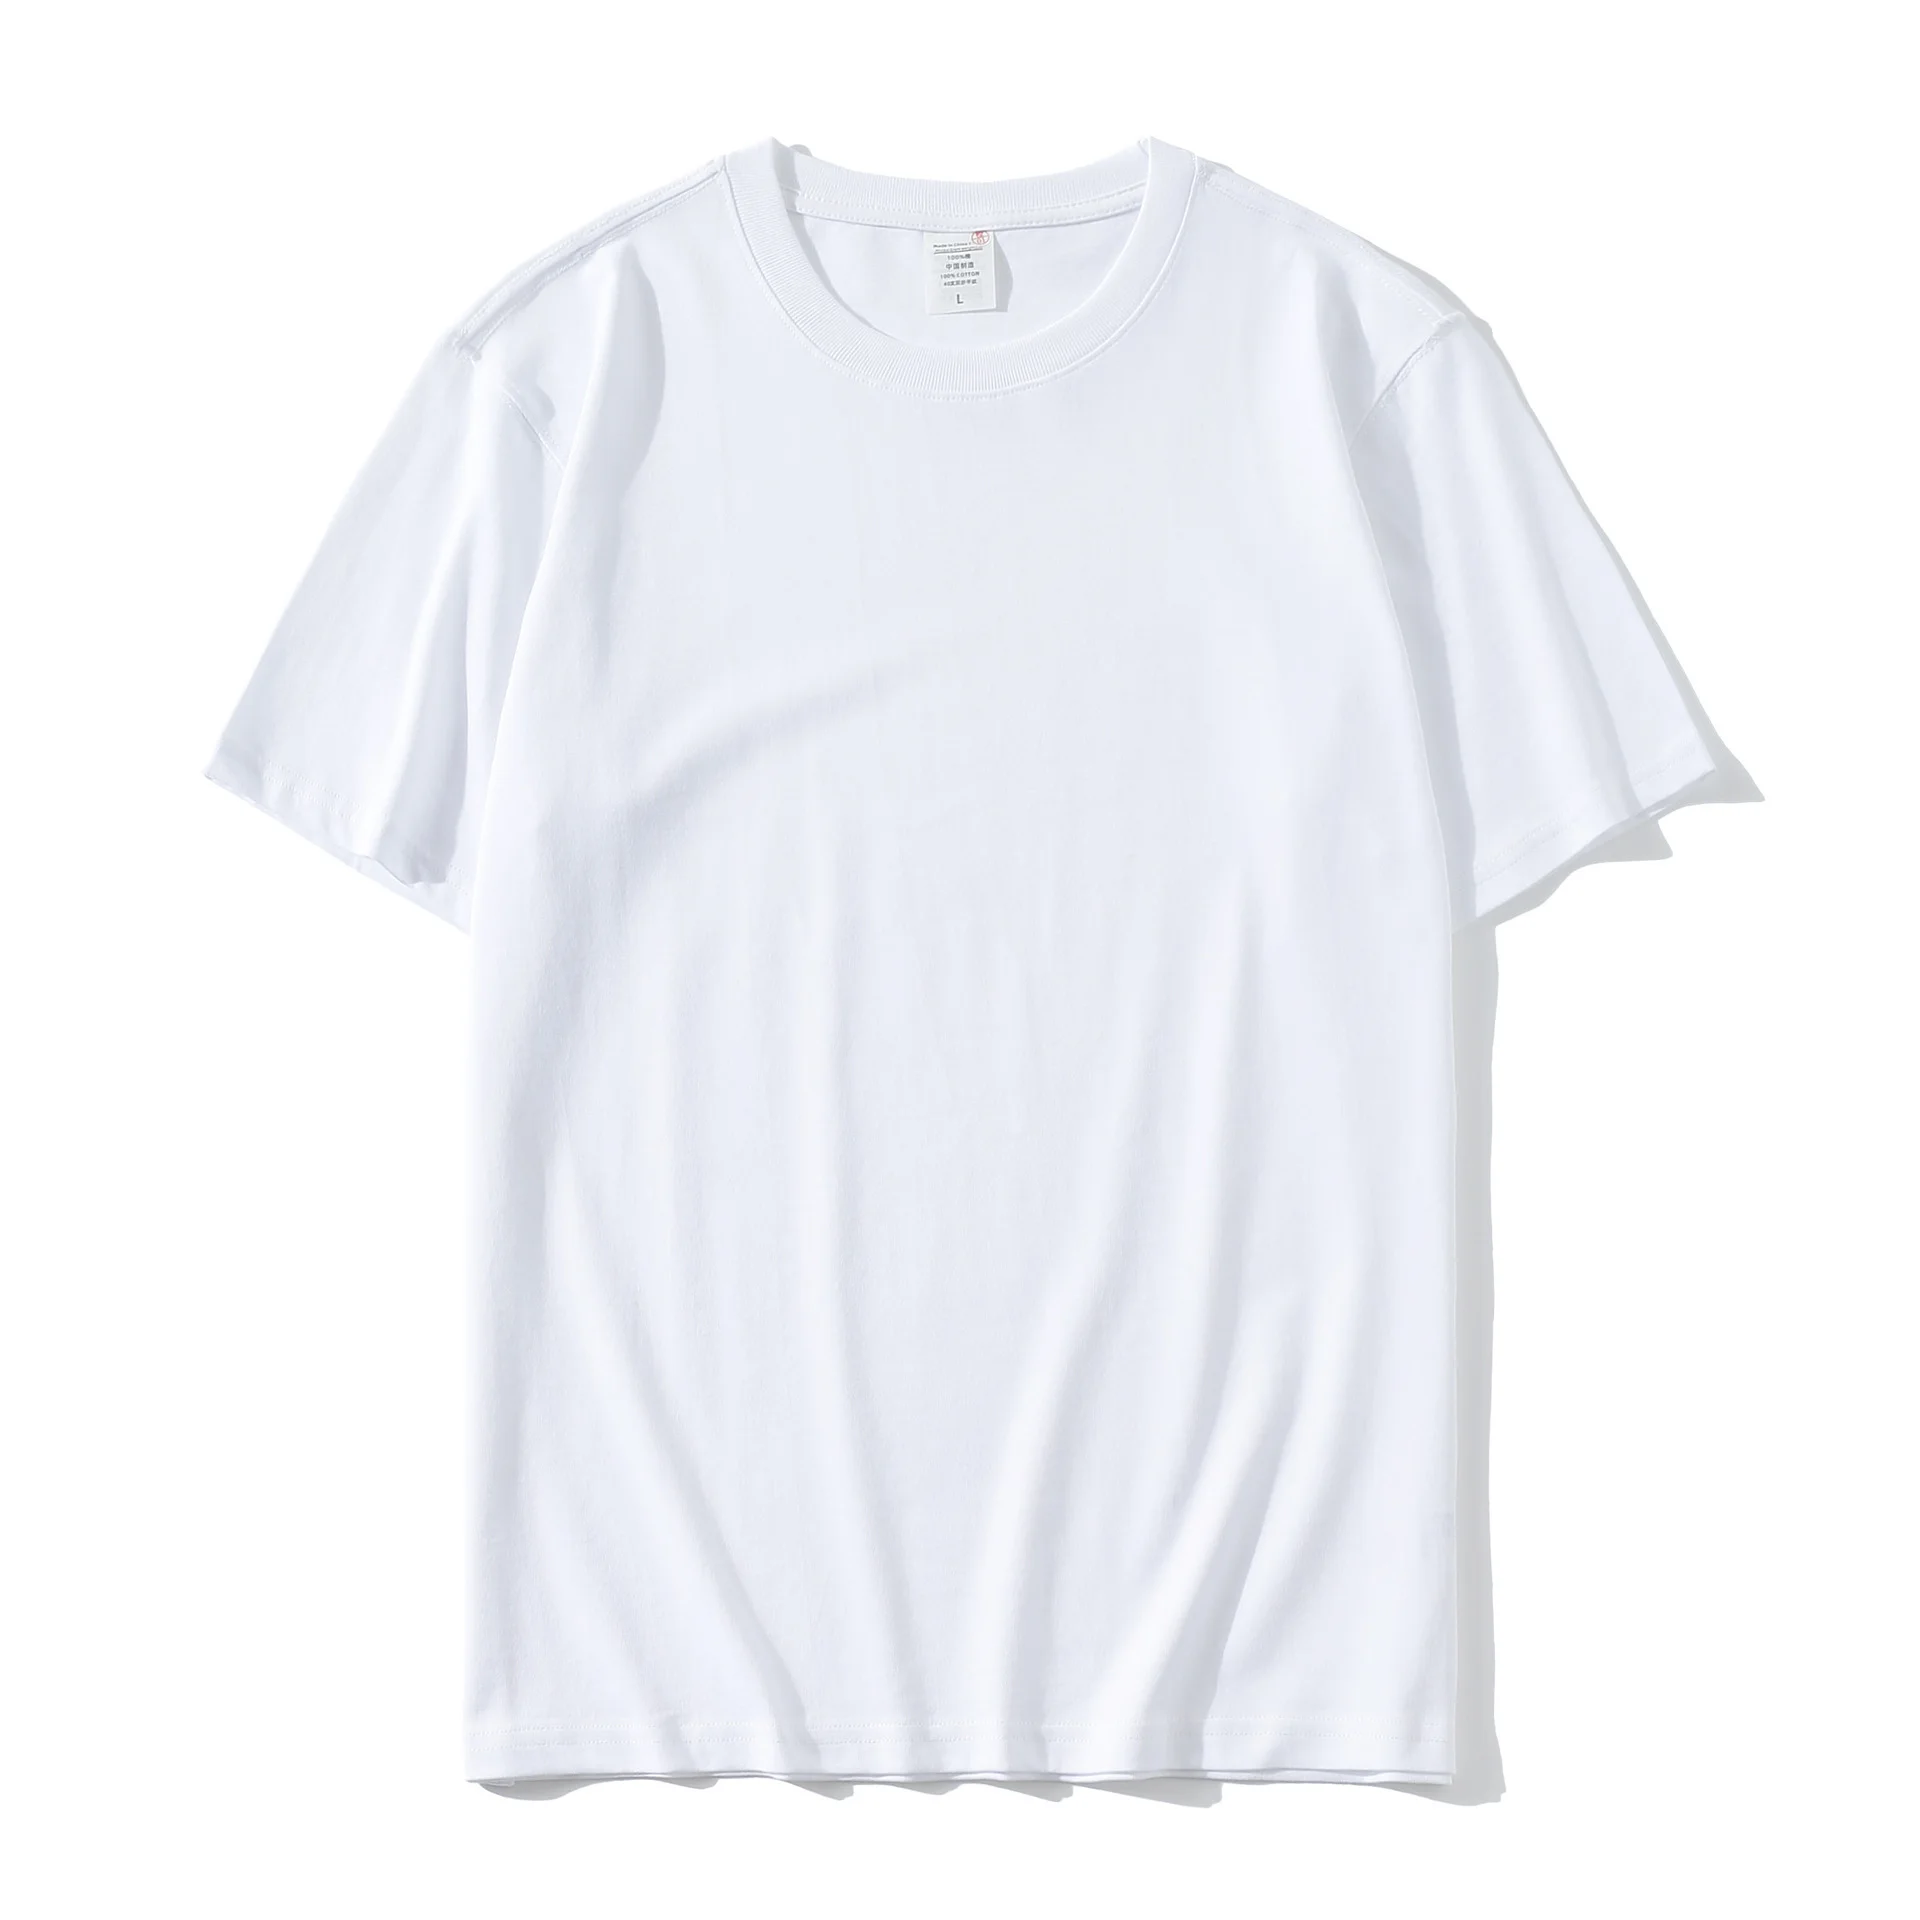 Wholesale Blank T shirts for Printing in Belarus